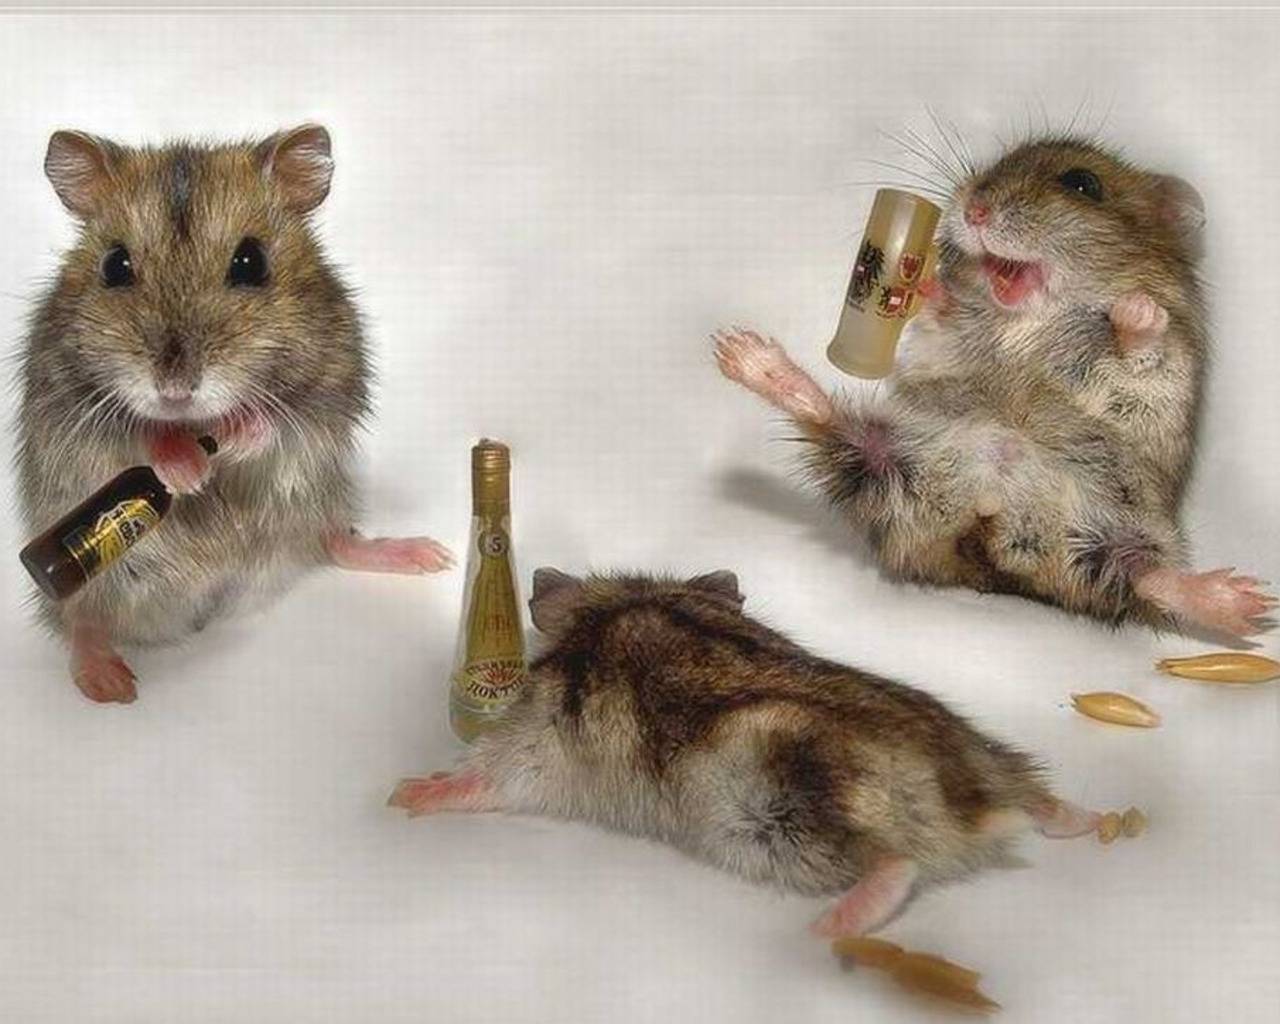 Thee Drunk Mice